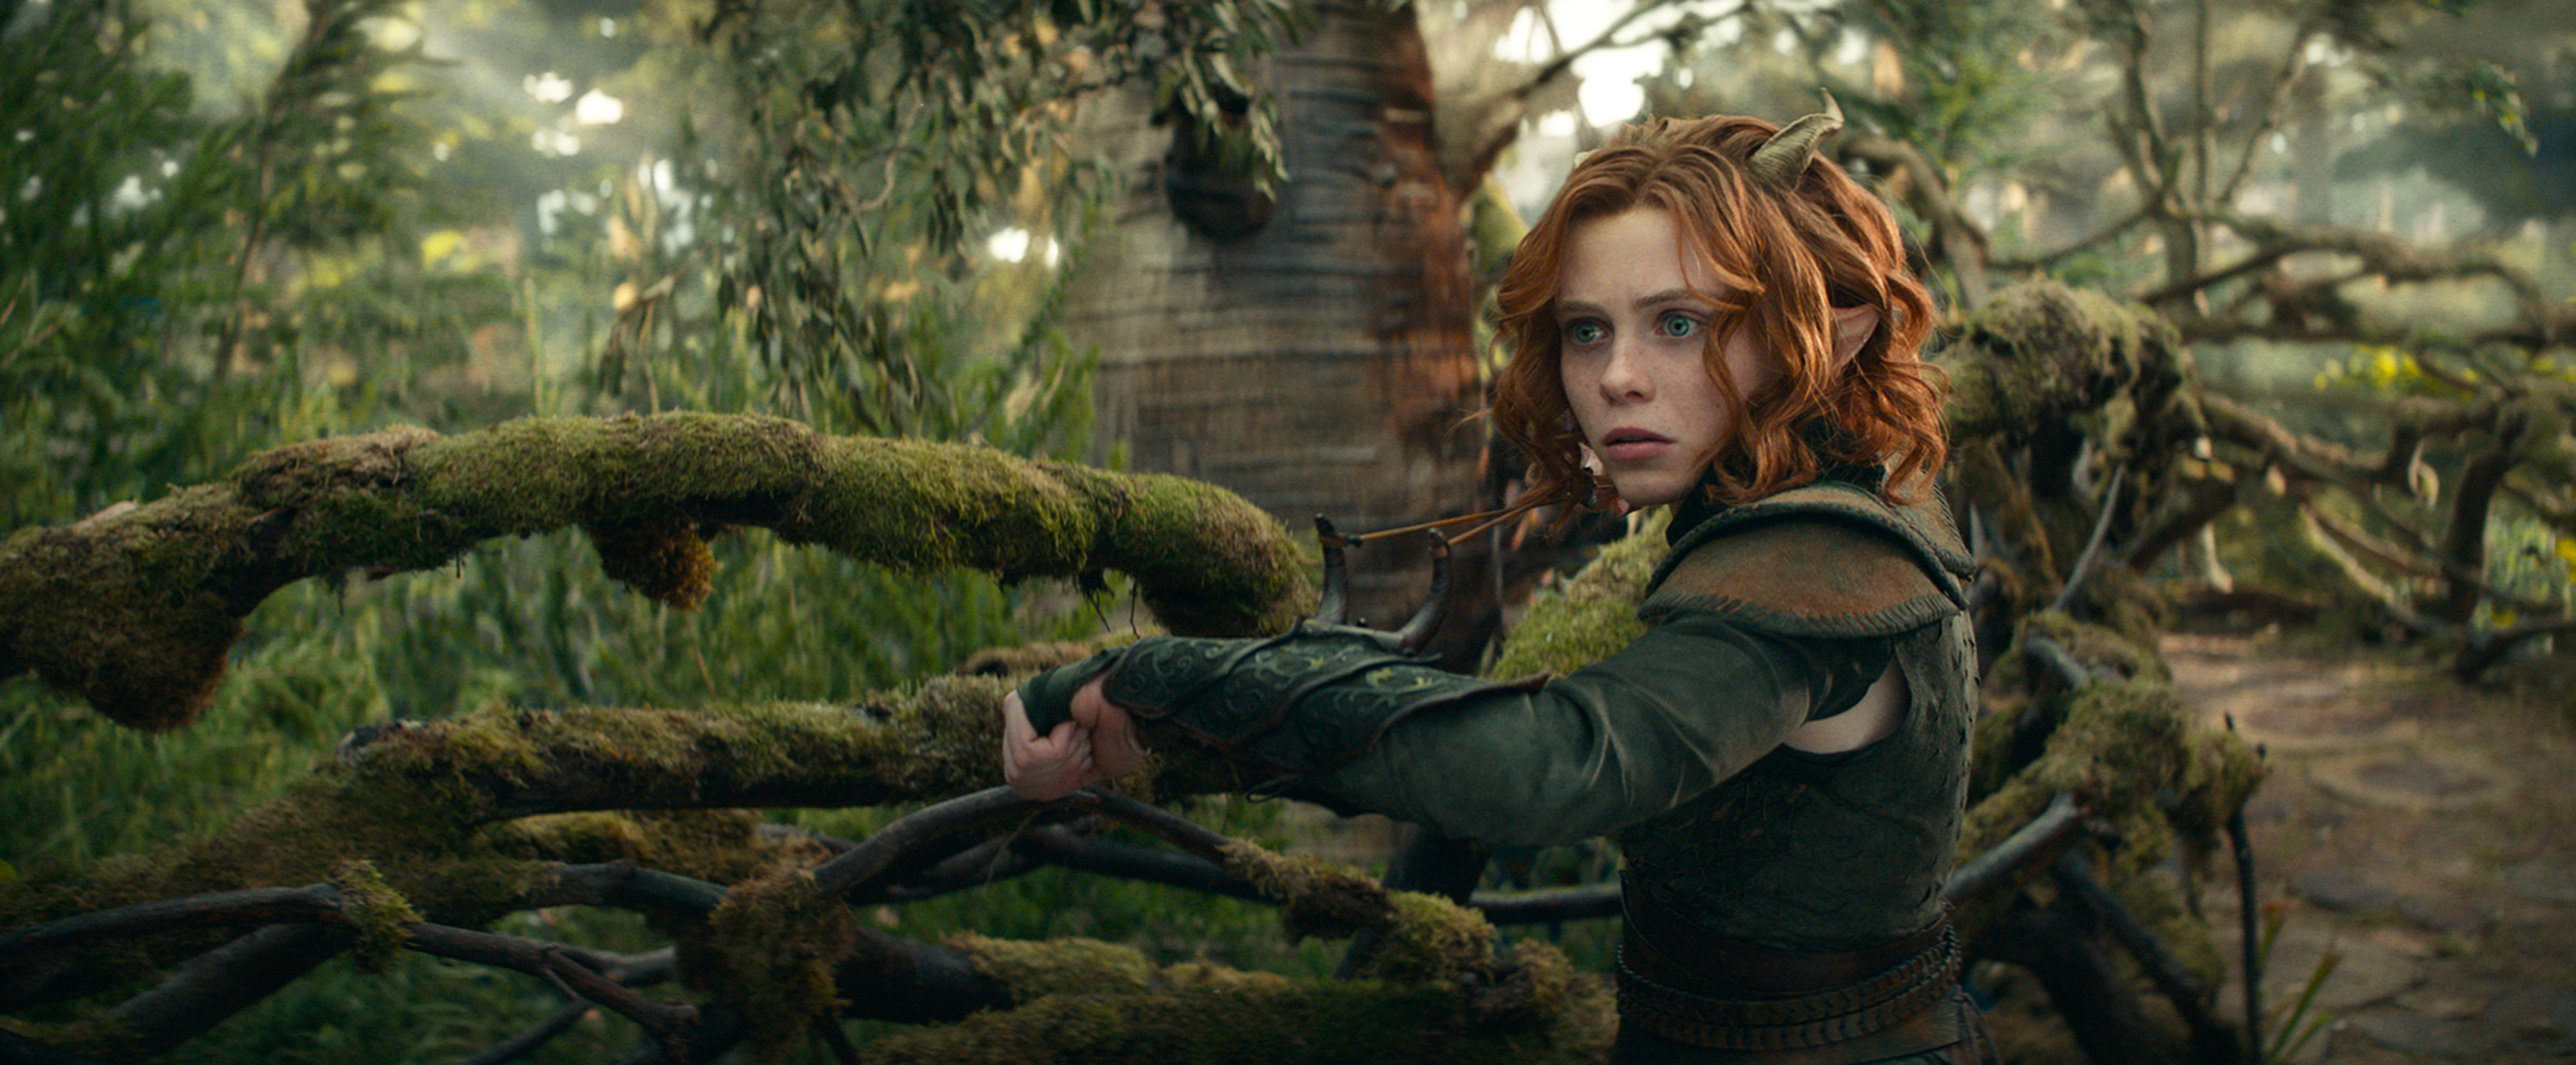 Sophia Lillis plays Doric in 'Dungeons & Dragons: Honor Among Thieves'. Image: Paramount Pictures / eOne / Supplied